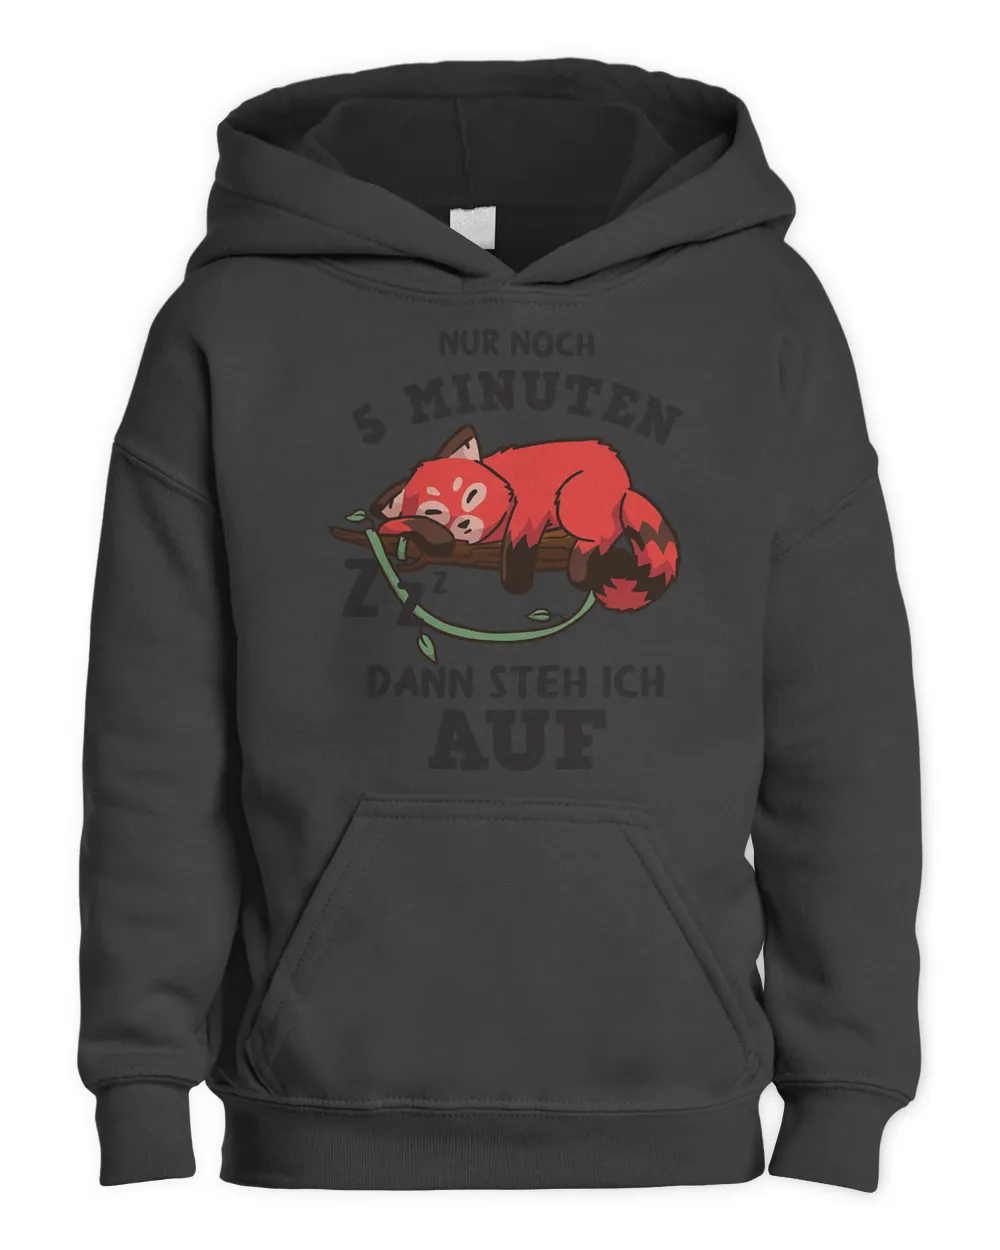 Only 5 minutes then I stand on Fuchs Schlafen Sleep T-Shirt